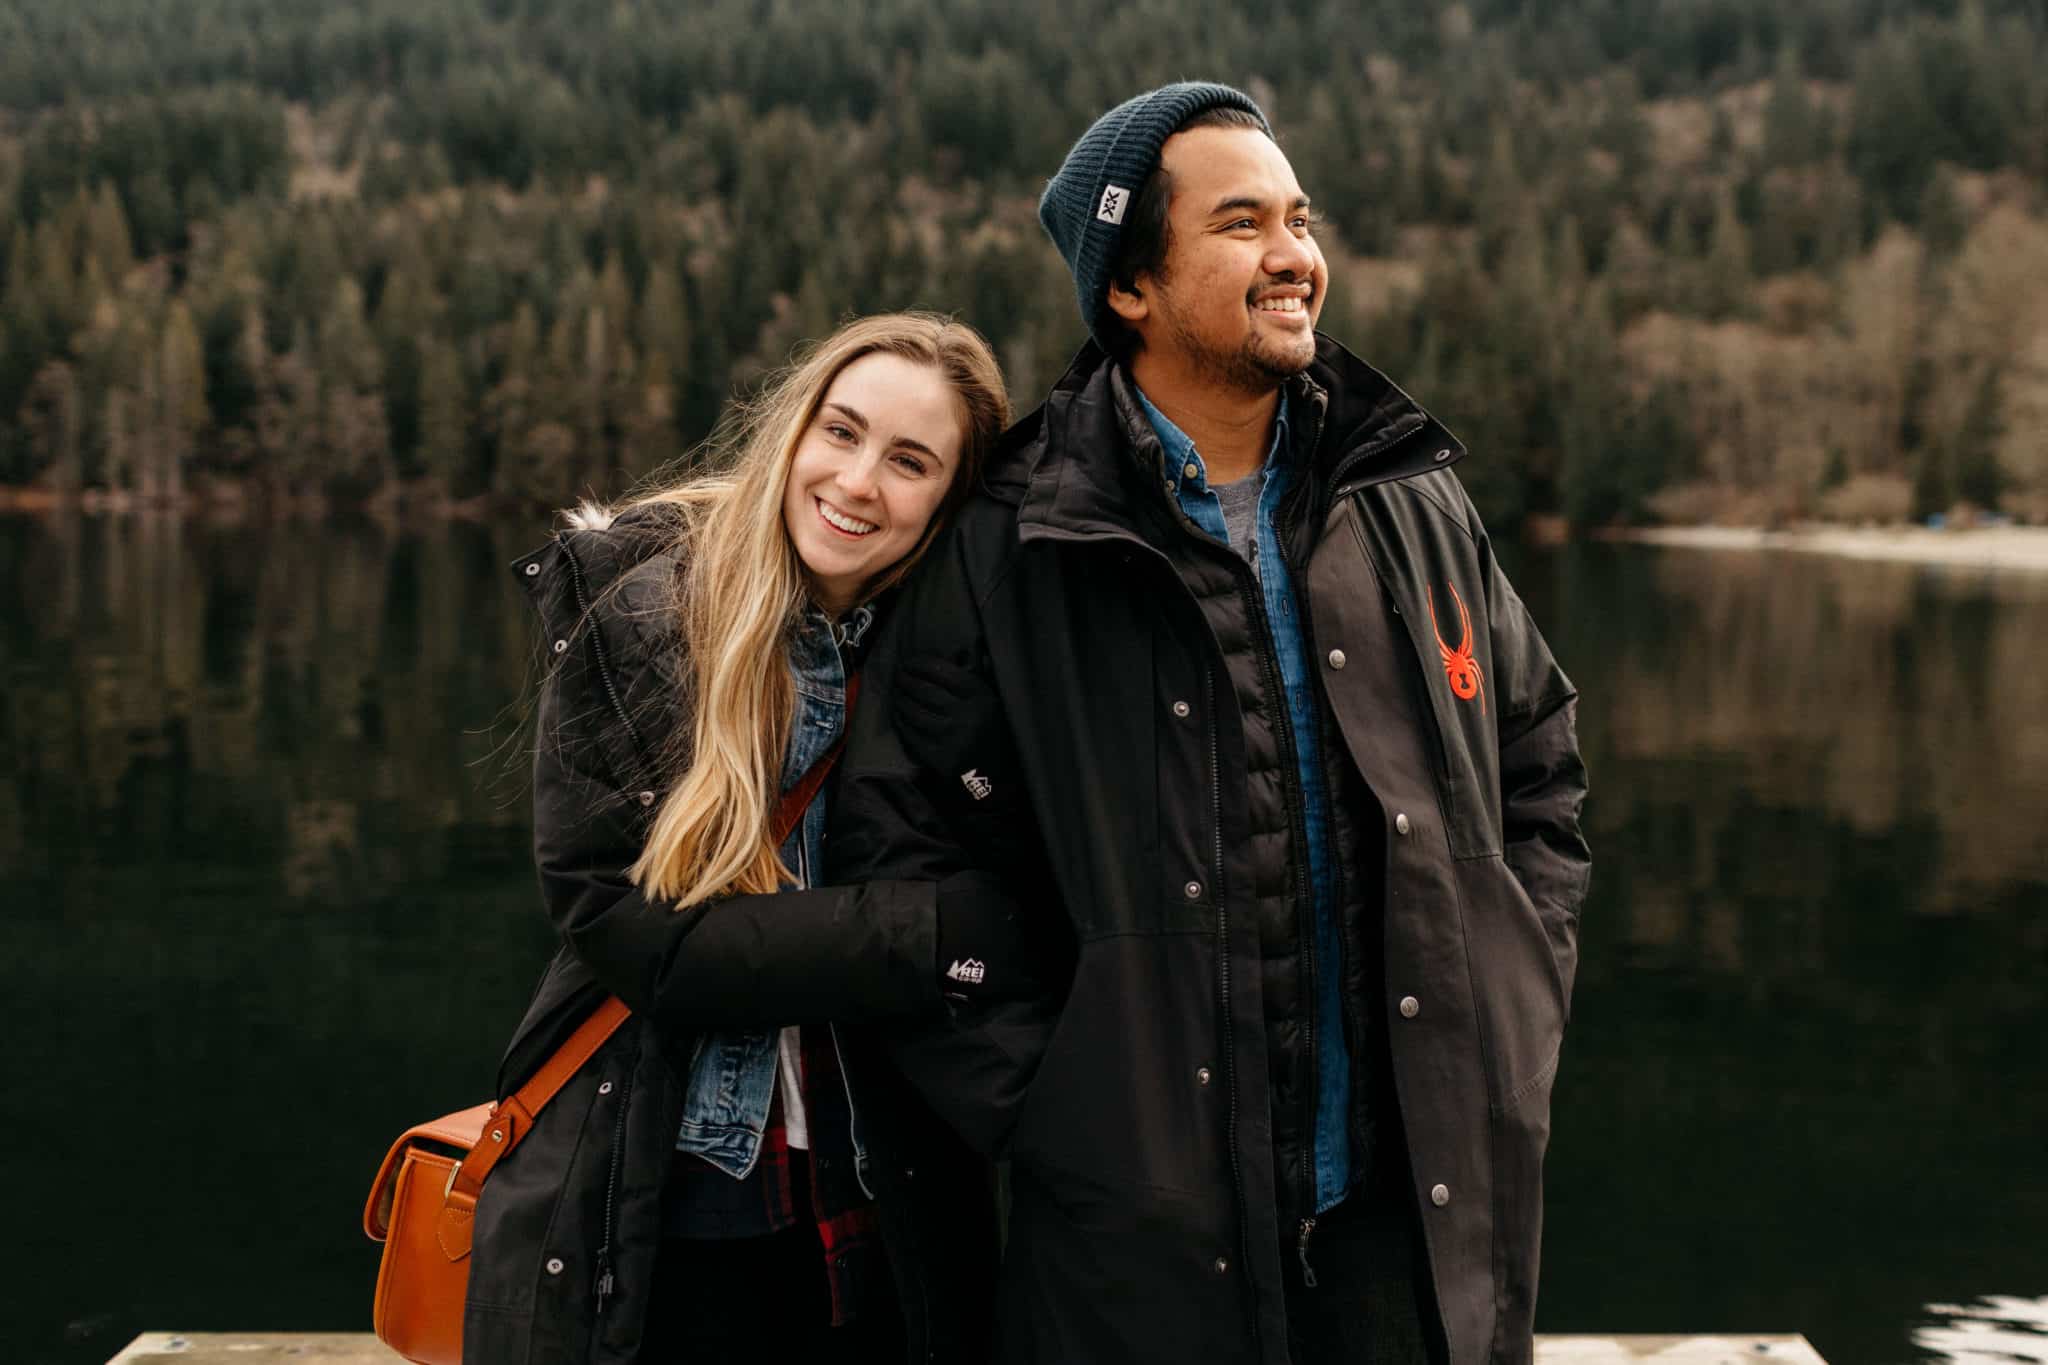 Traveling As A Couple - Berty and Emily Mandagie